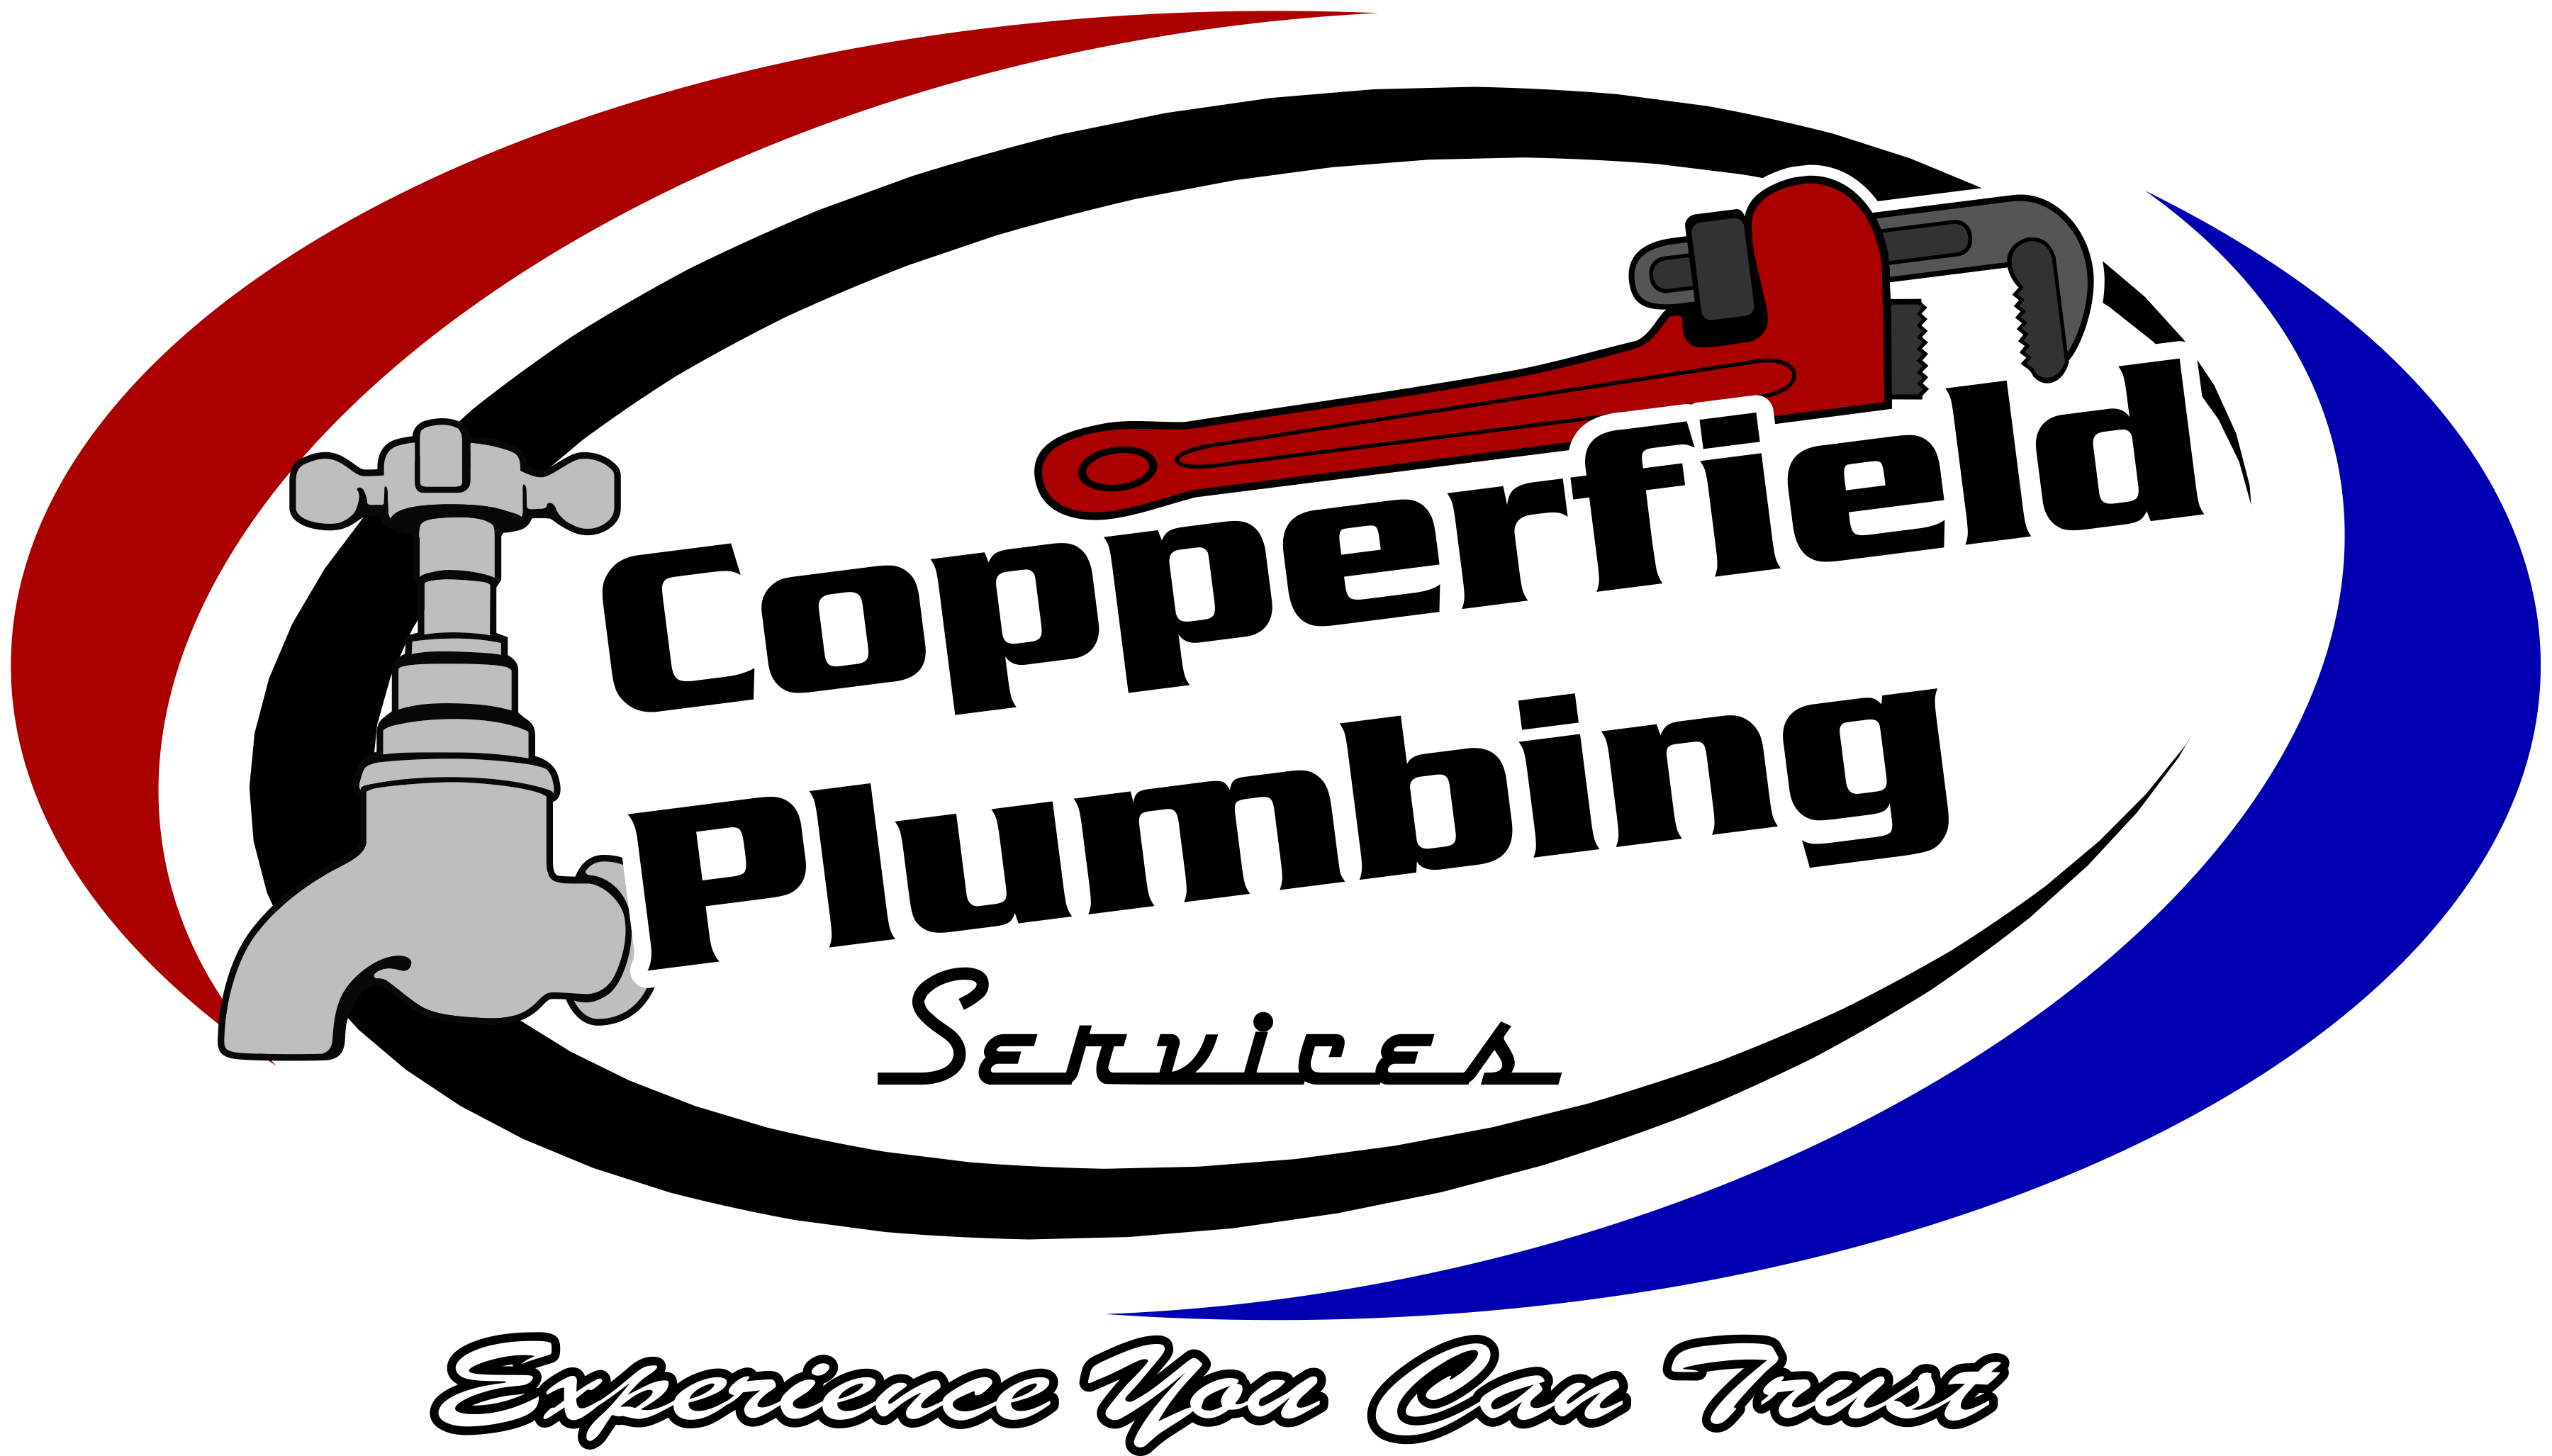 Plumber clipart damages. Copperfield plumbing cypress services